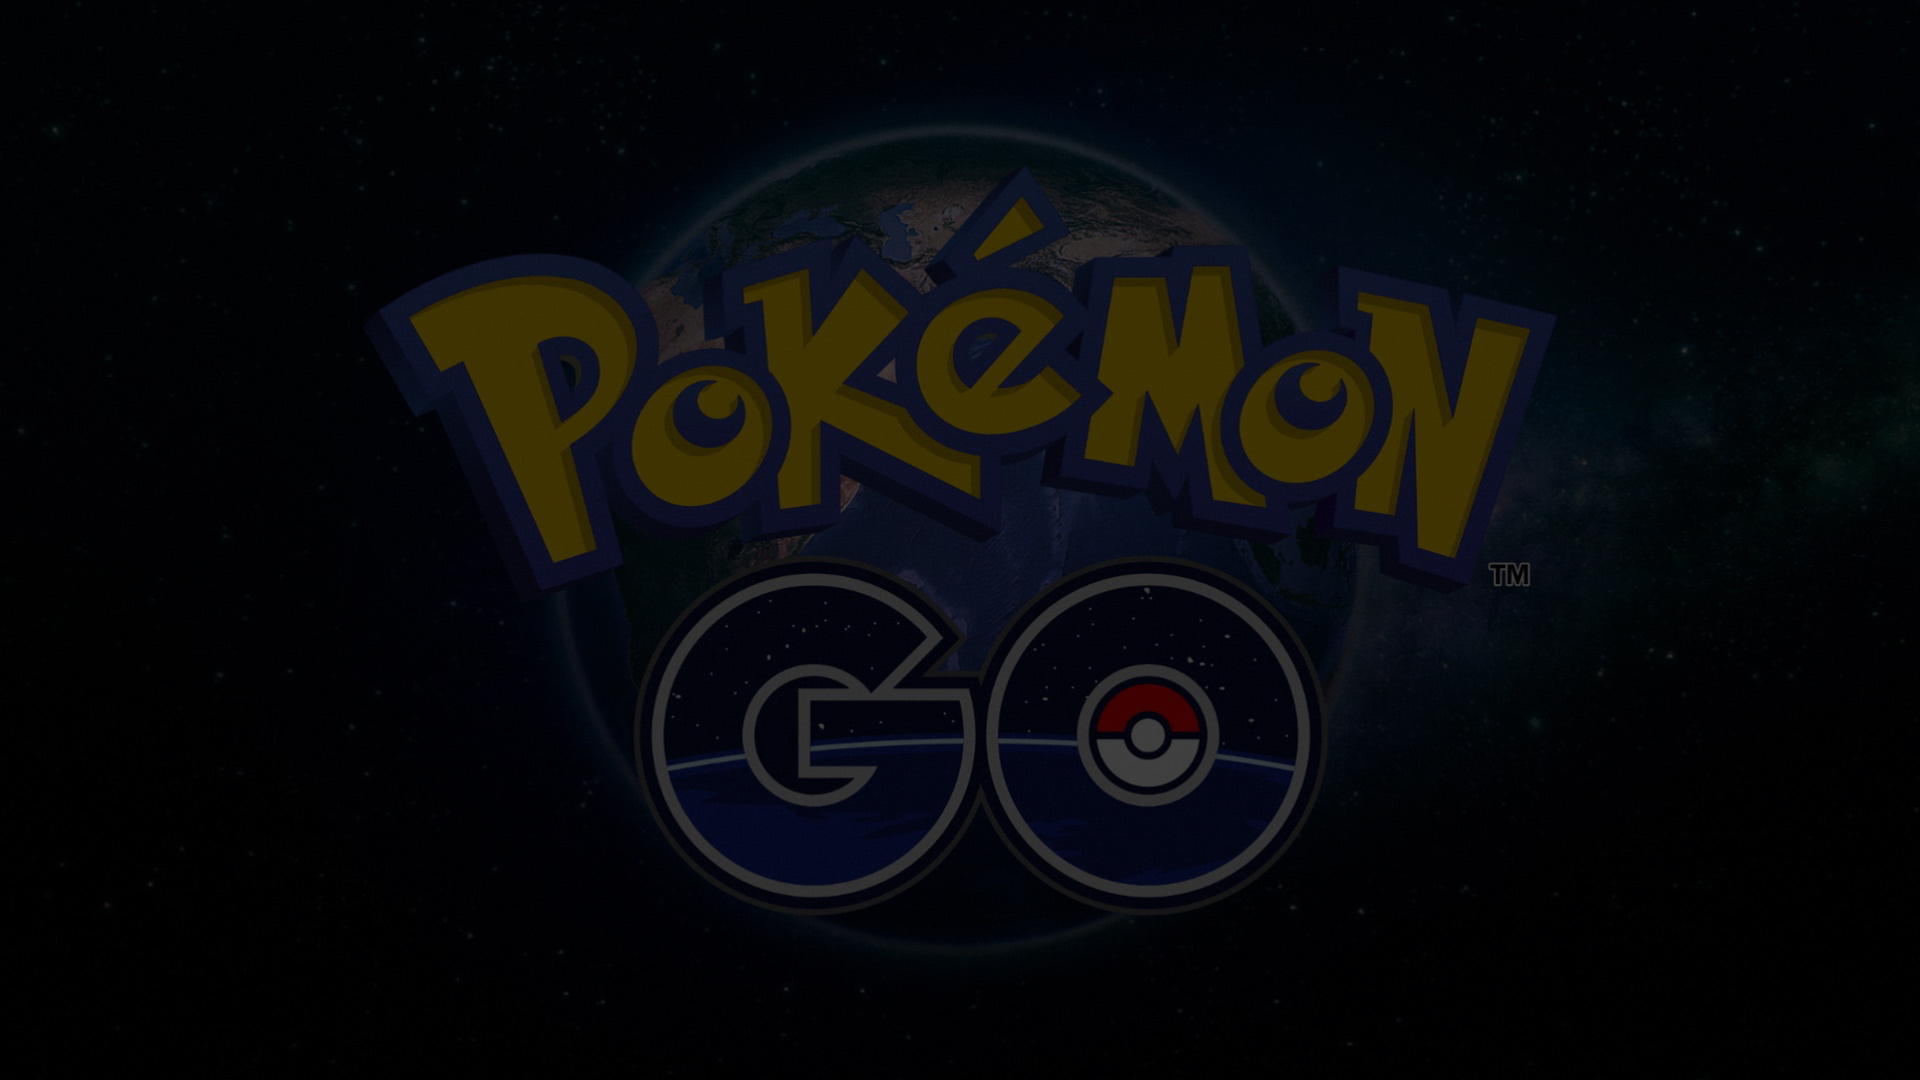 Pokémon Go: An Innovative New Approach To Casual Gaming